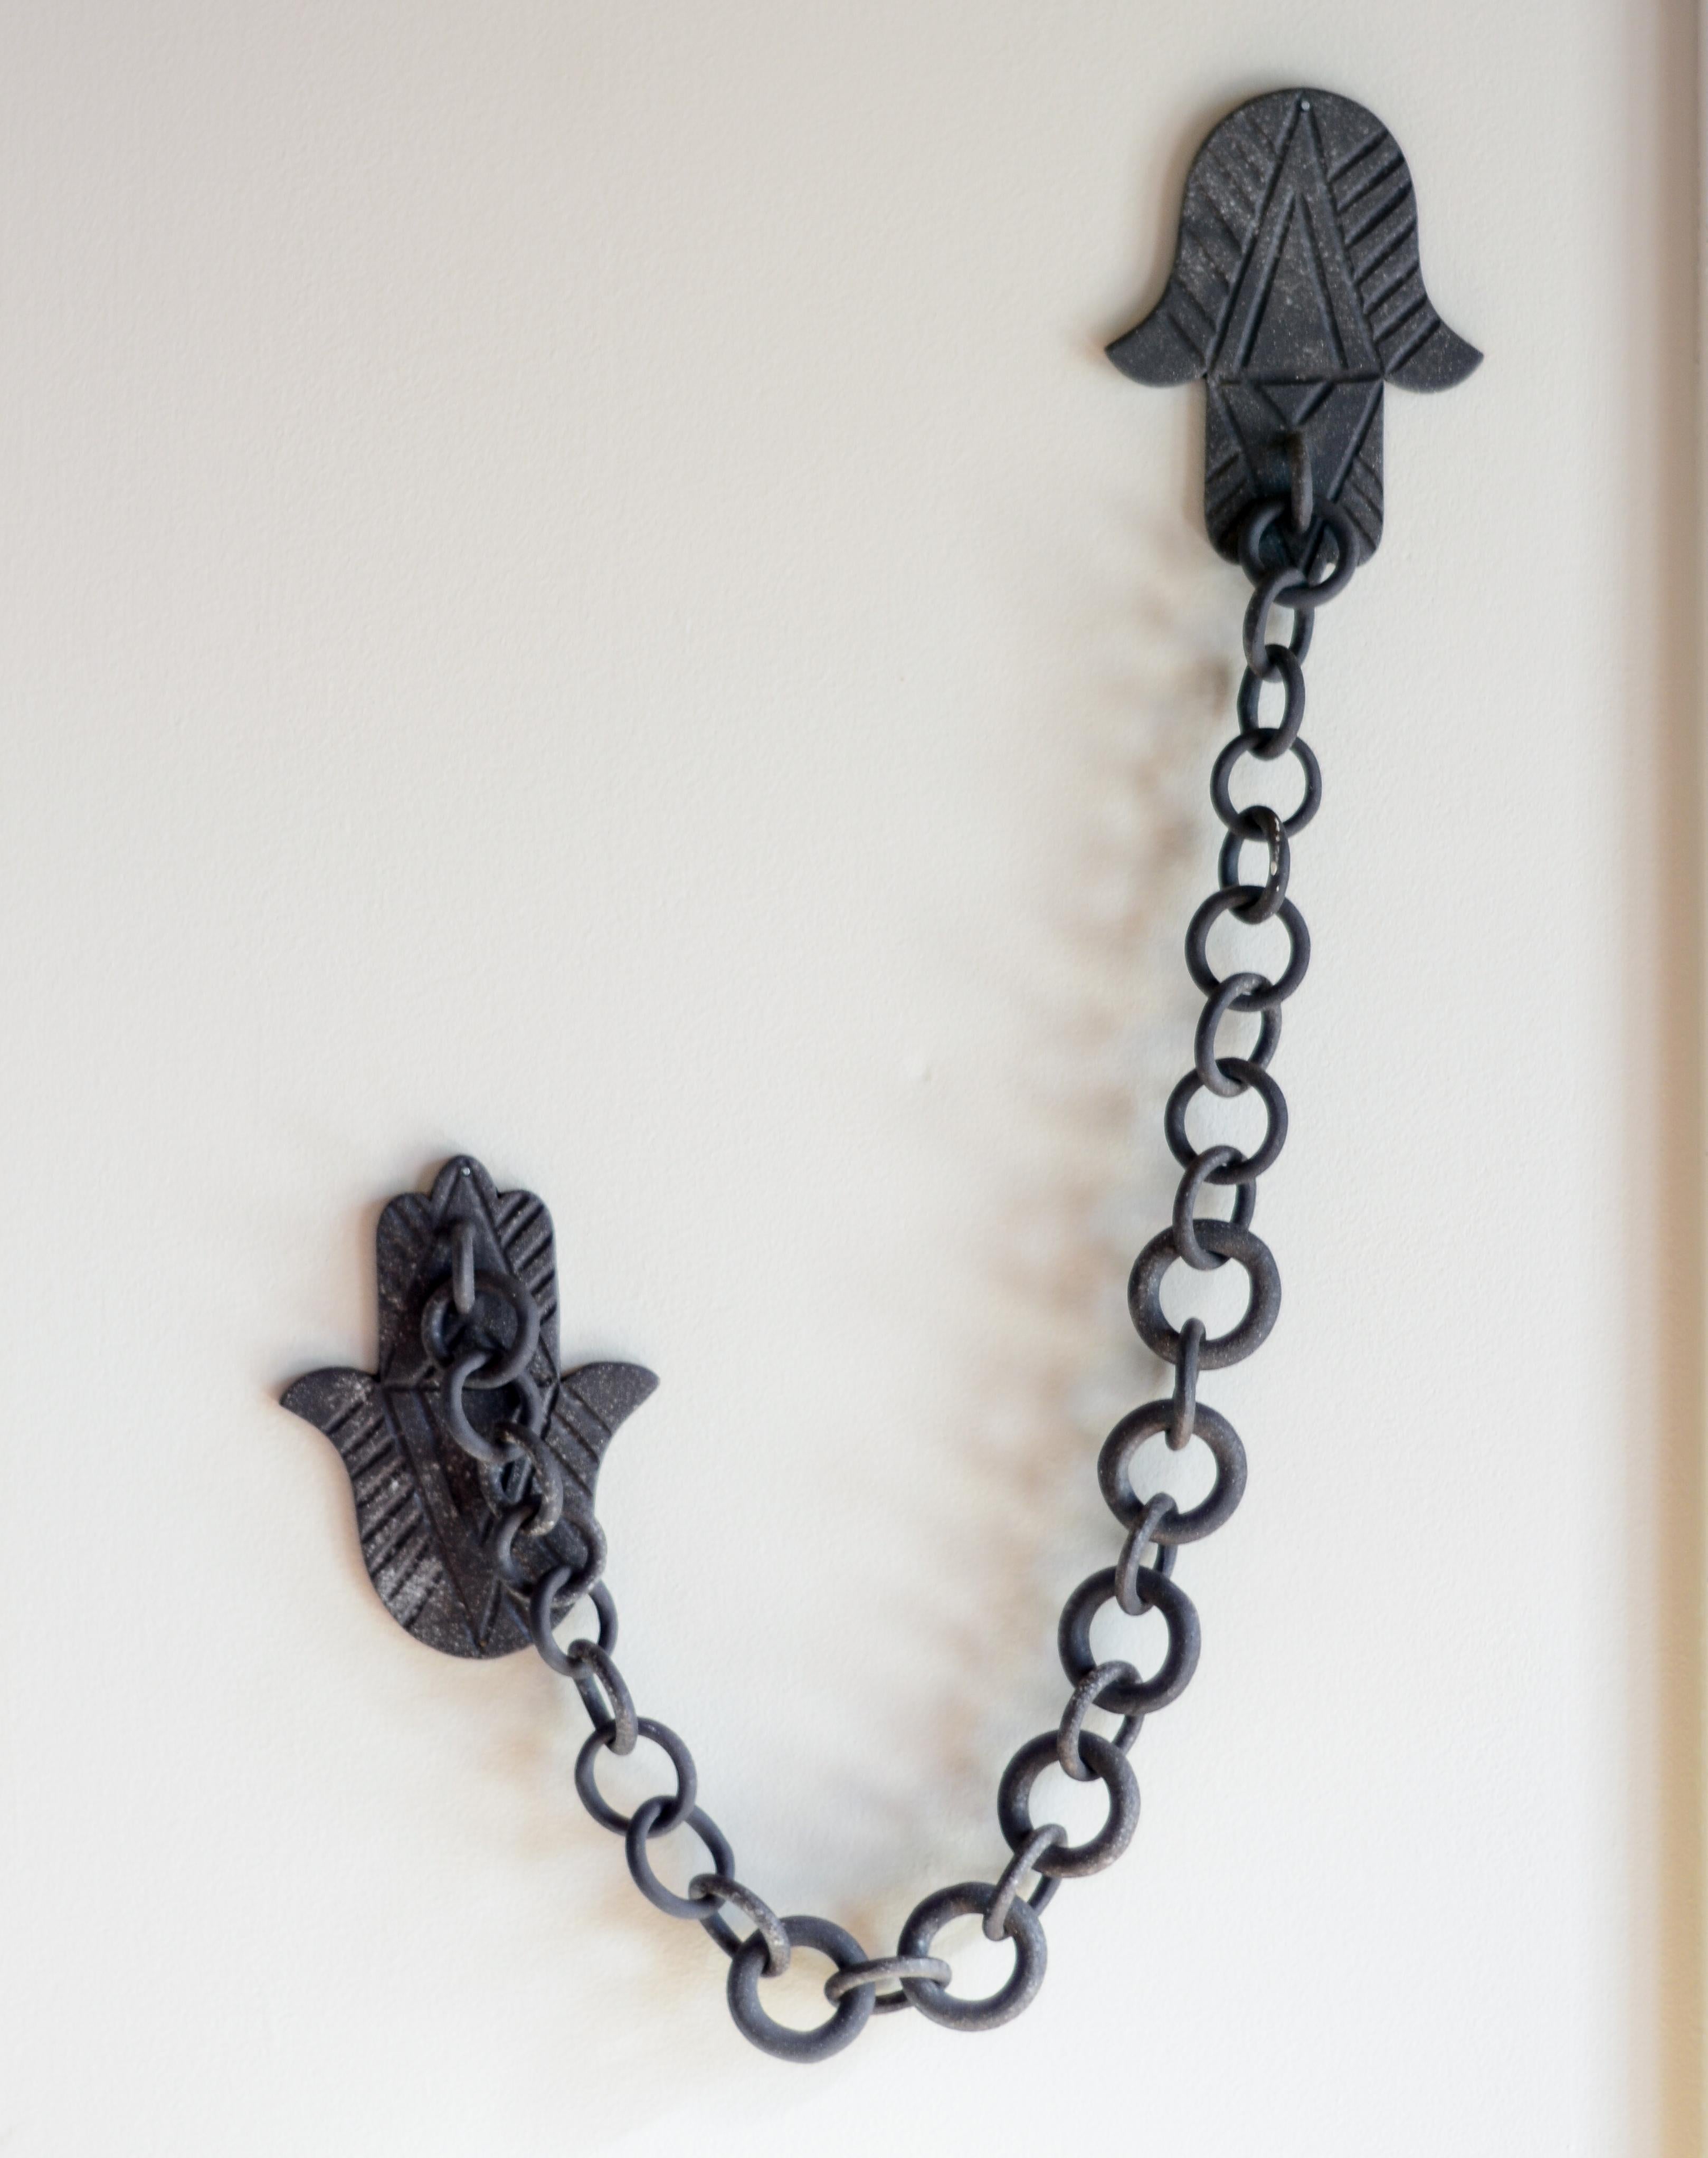 Hand-Crafted Ceramic Hand Link Chain Wall Sculpture by Asmaa Aman Tran